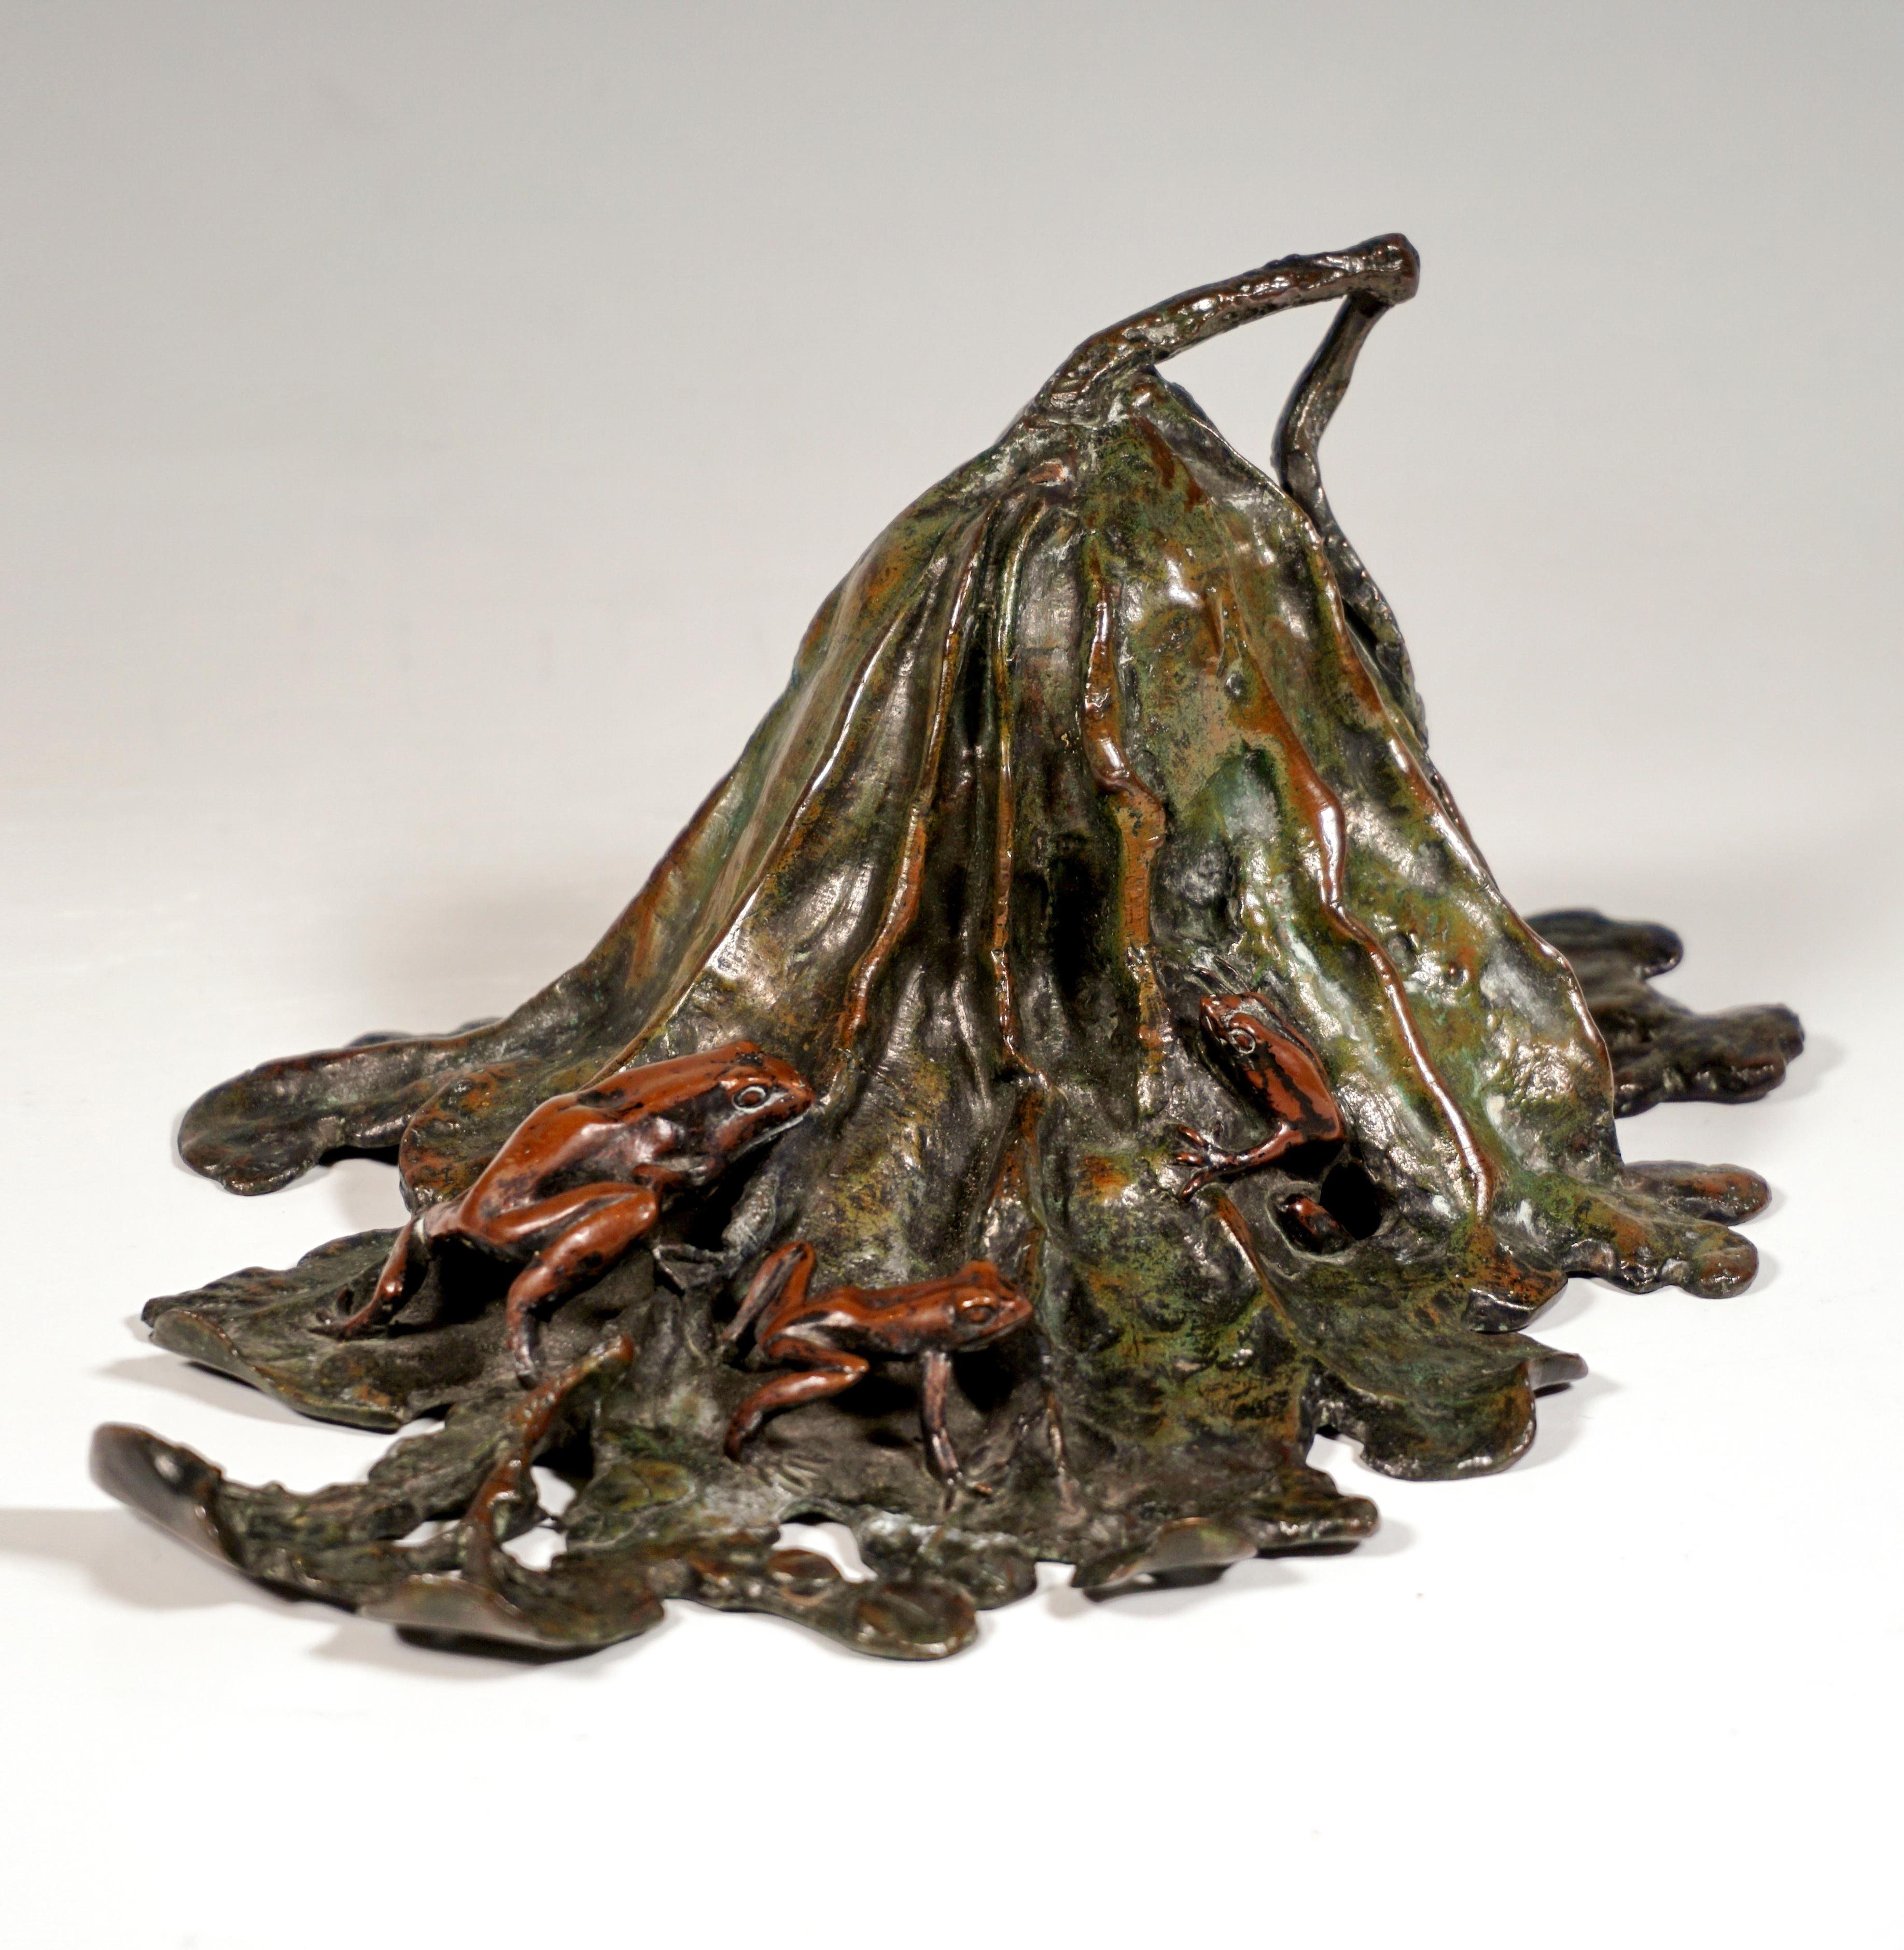 Three frogs climbing on a twisted, arched cabbage leaf. Bergmann signum on the bottom. 
Excellent and detailed quality of the composition, very lifelike representation, as is typical for Viennese bronze art.

Manufactured ca. 1910 by Vienna